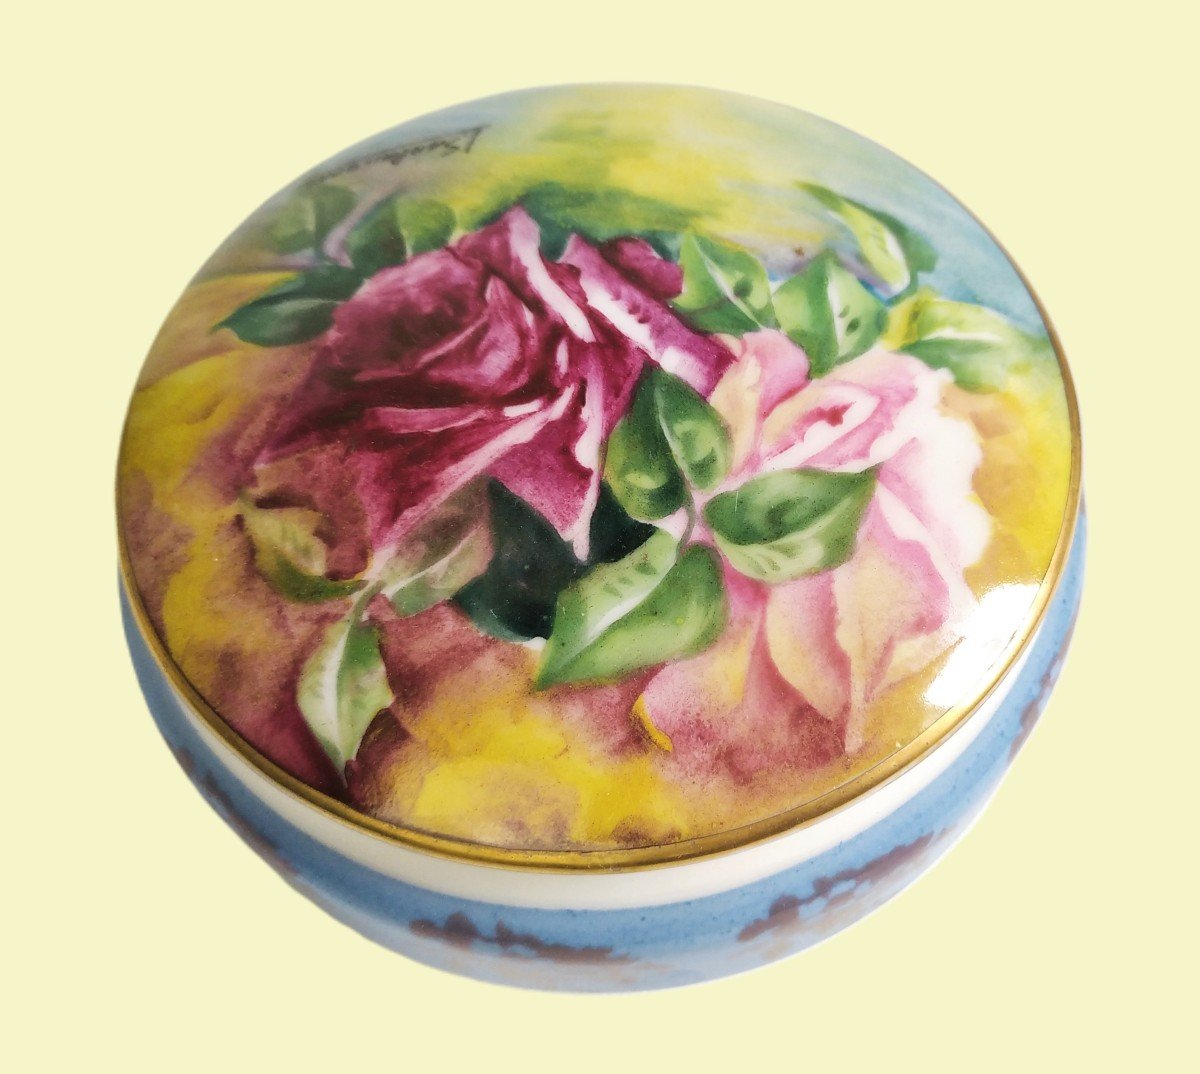 Jewelry Or Candy Box Hand Painted Limoges Porcelain Decor Roses Signed By Artist Sarlangeas -photo-1